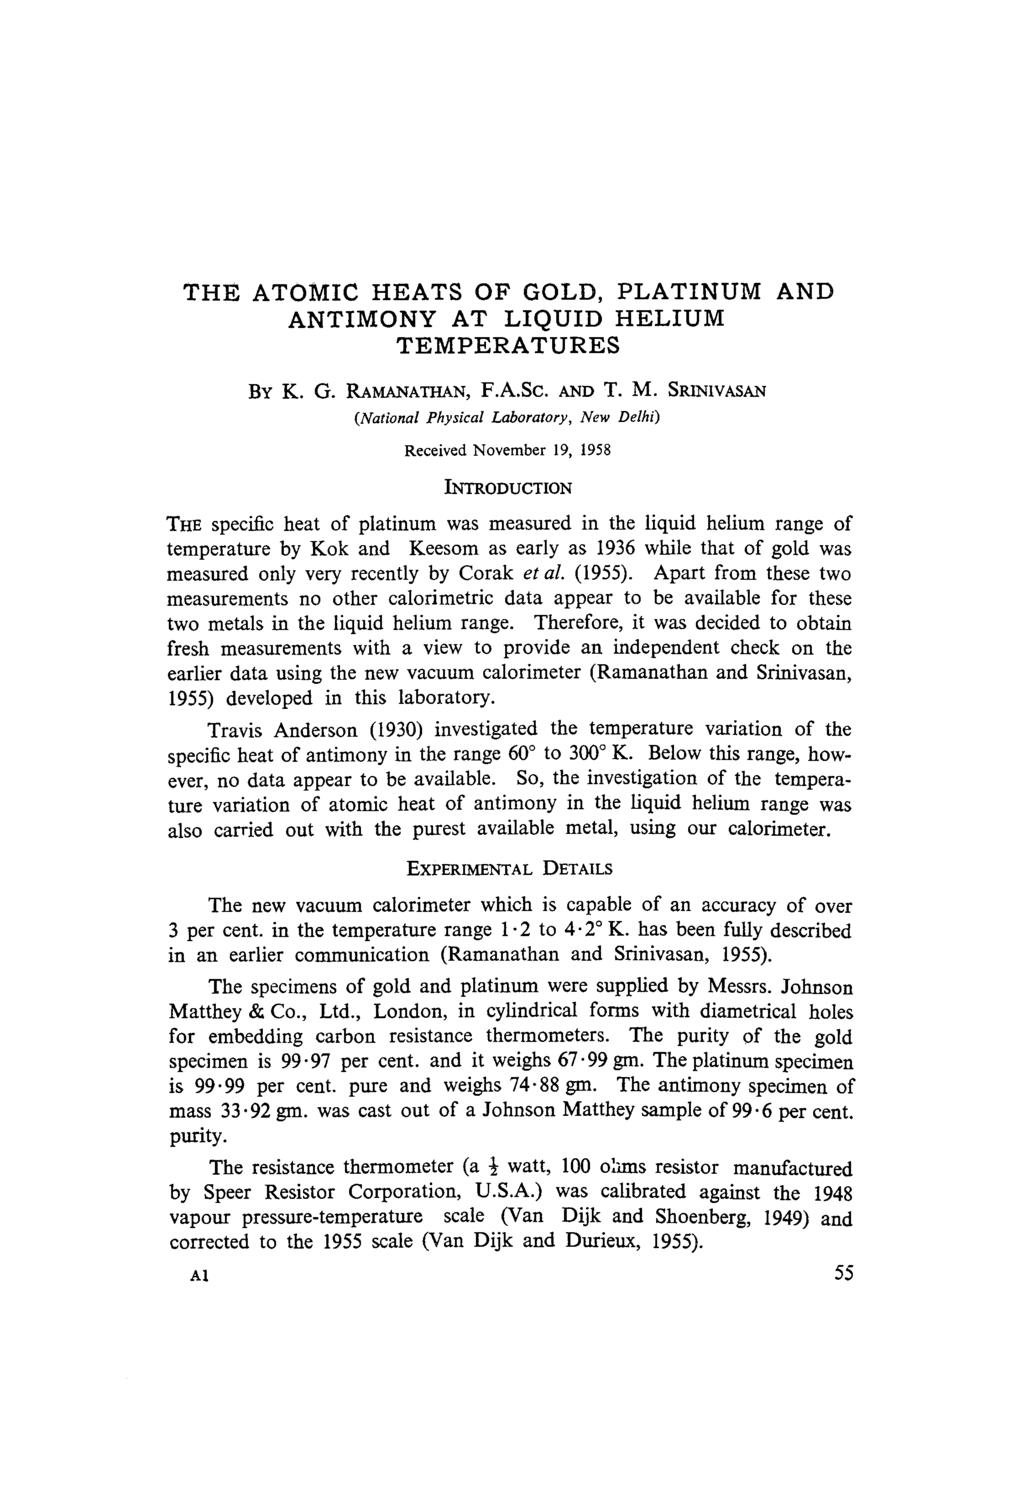 THE ATMIC HEATS F GLD, PLATINUM AND ANTIMNY AT LIQUID HELIUM TEMPERATURES BY K. G. RAMANATHAN, F.A.Sc. ANI) T. M.